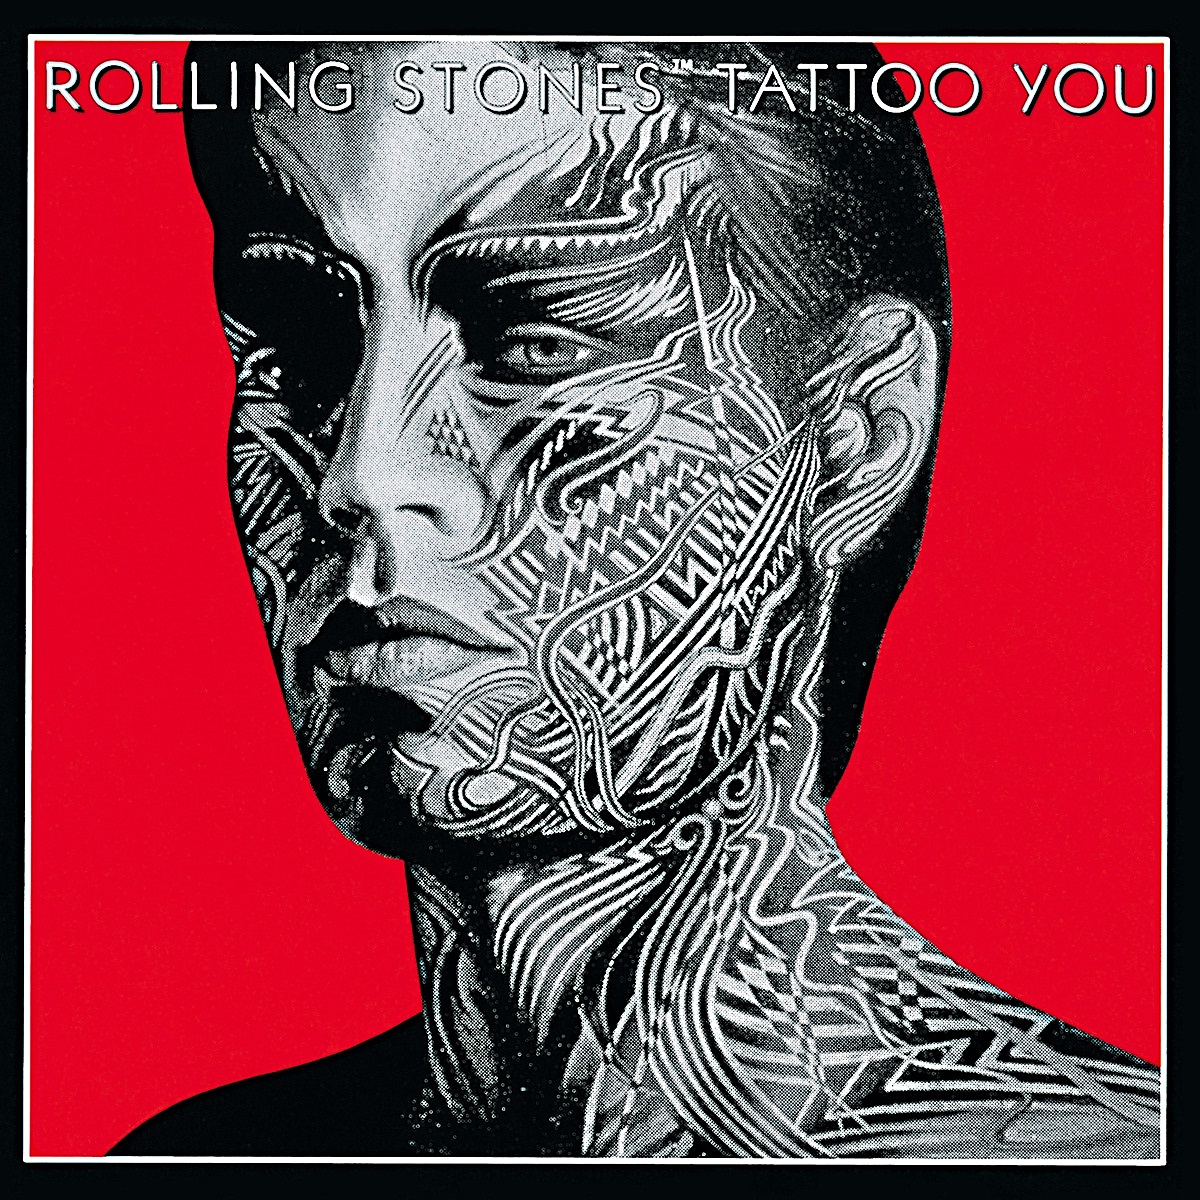 The Rolling Stones - Tattoo You (1981/2020) [FLAC 24bit/44,1kHz]